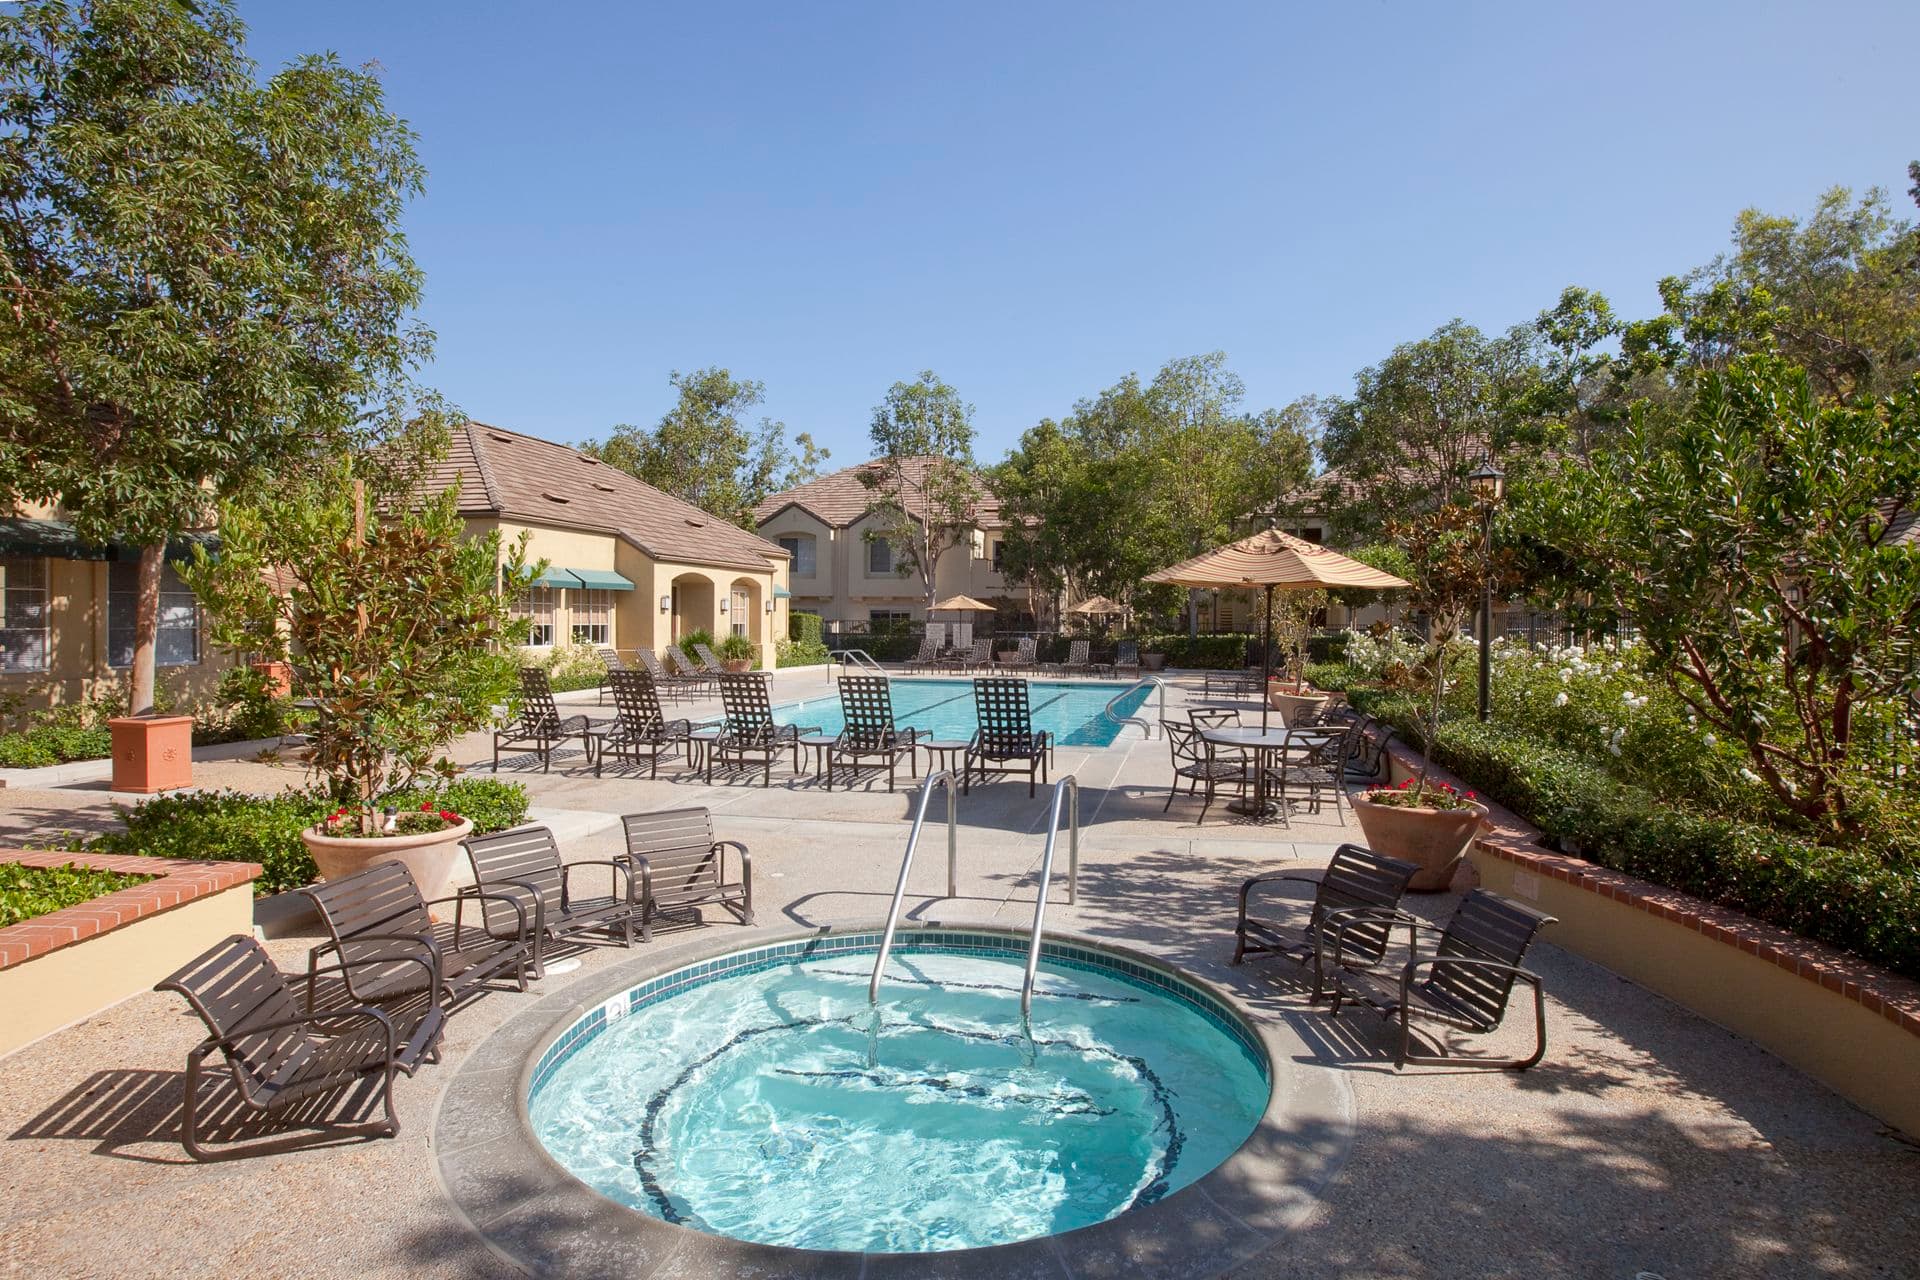 Exterior view of pool and spa at Turtle Rock Canyon Apartment Homes in Irvine, CA.